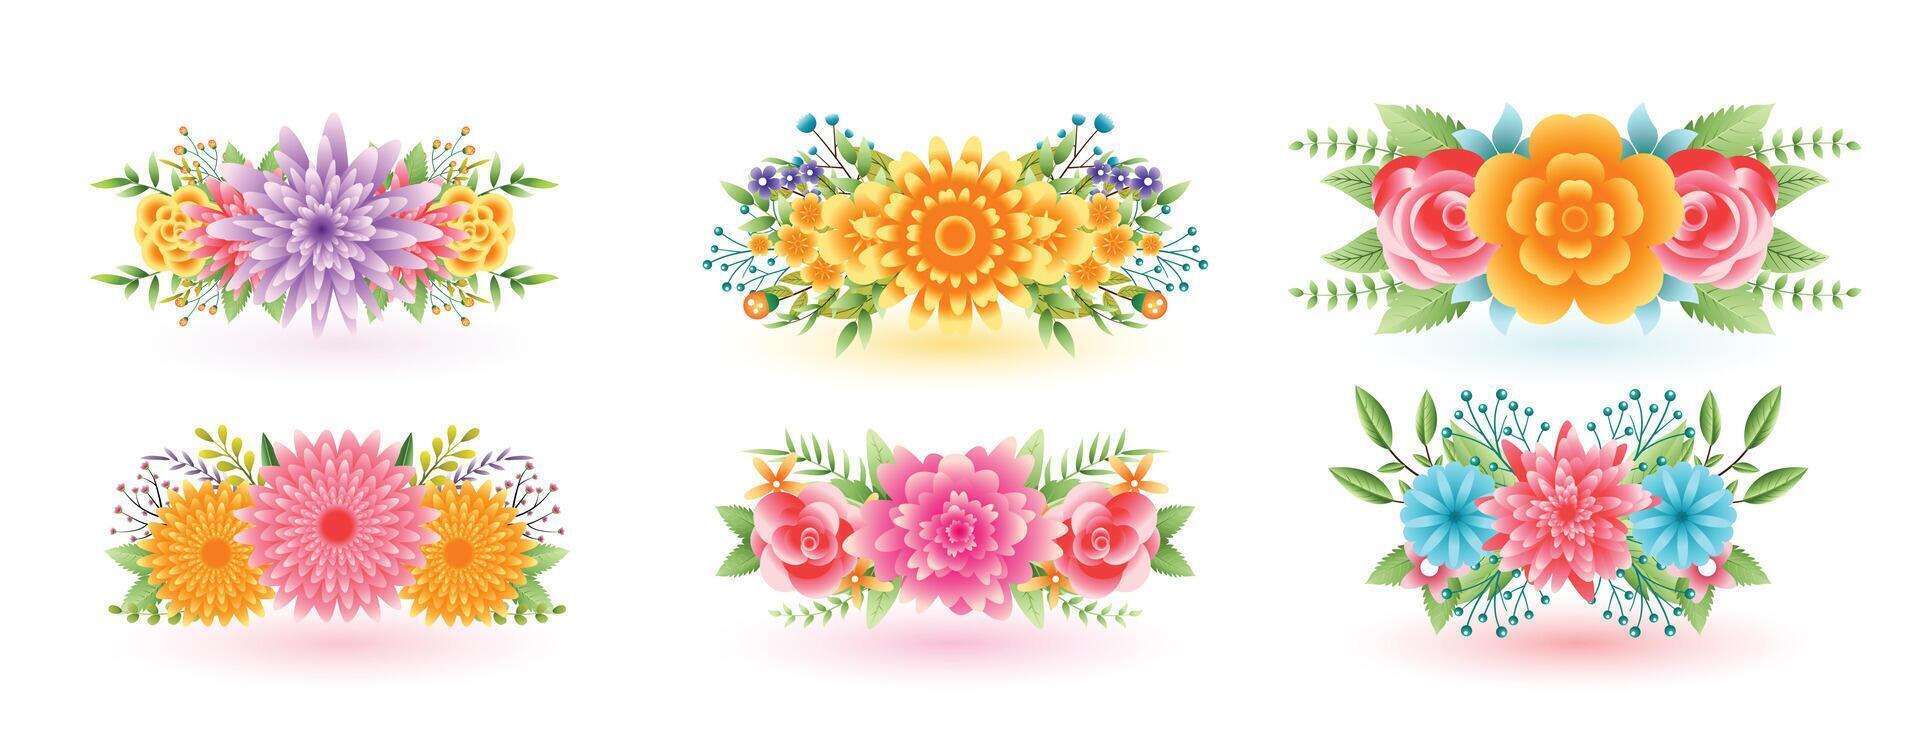 decorative lovely flowers set with leaves design vector